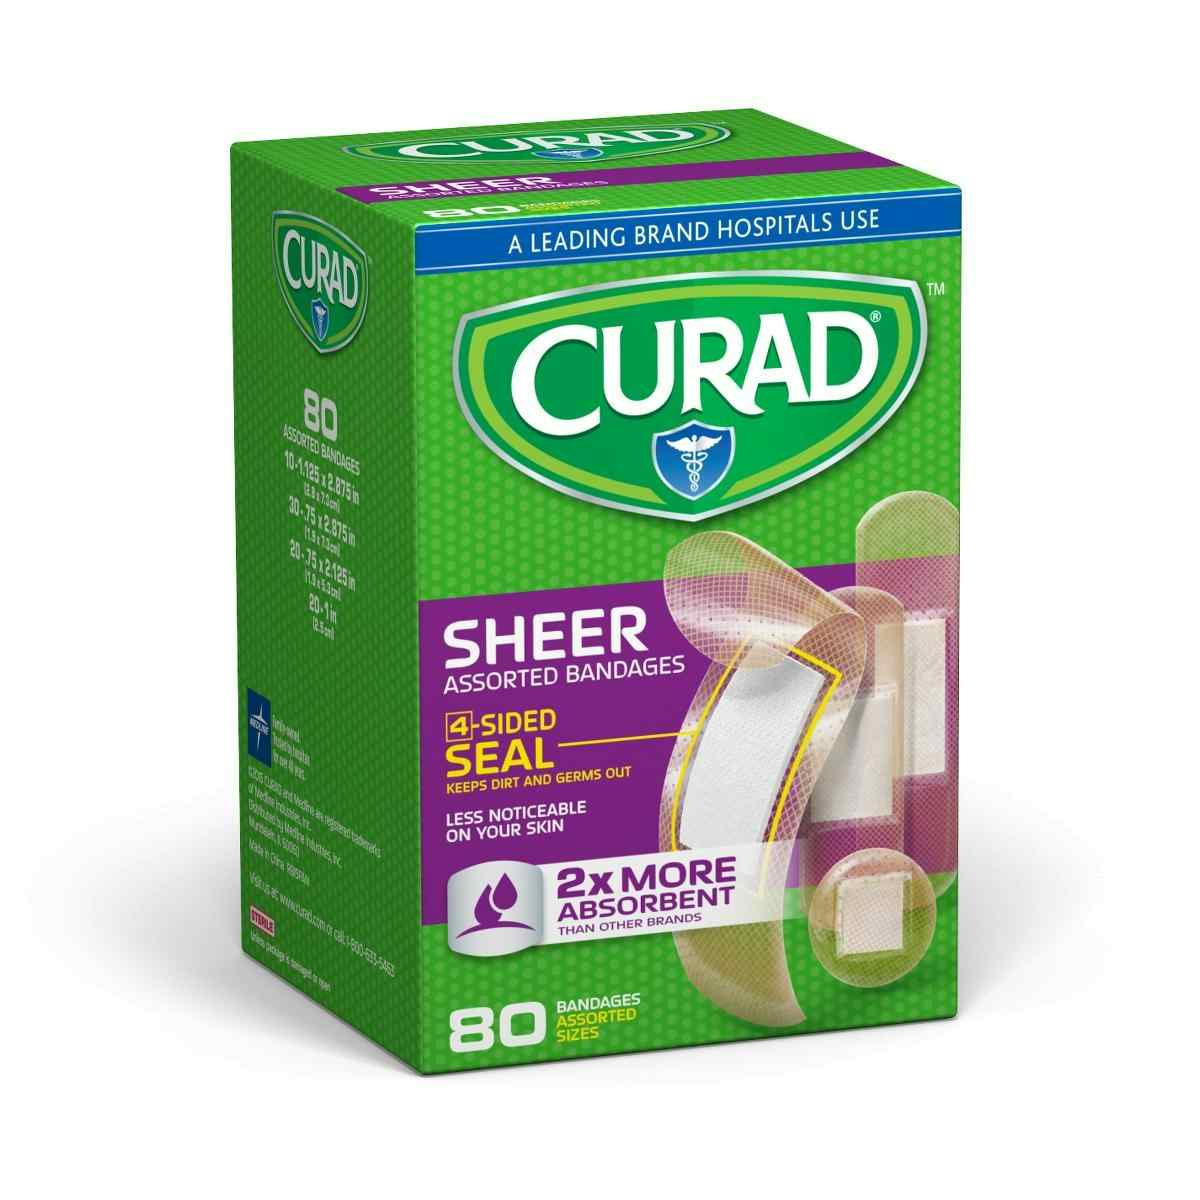 Curad Sheer Adhesive Bandages, CUR45243RB, Assorted Sizes - Case of 24